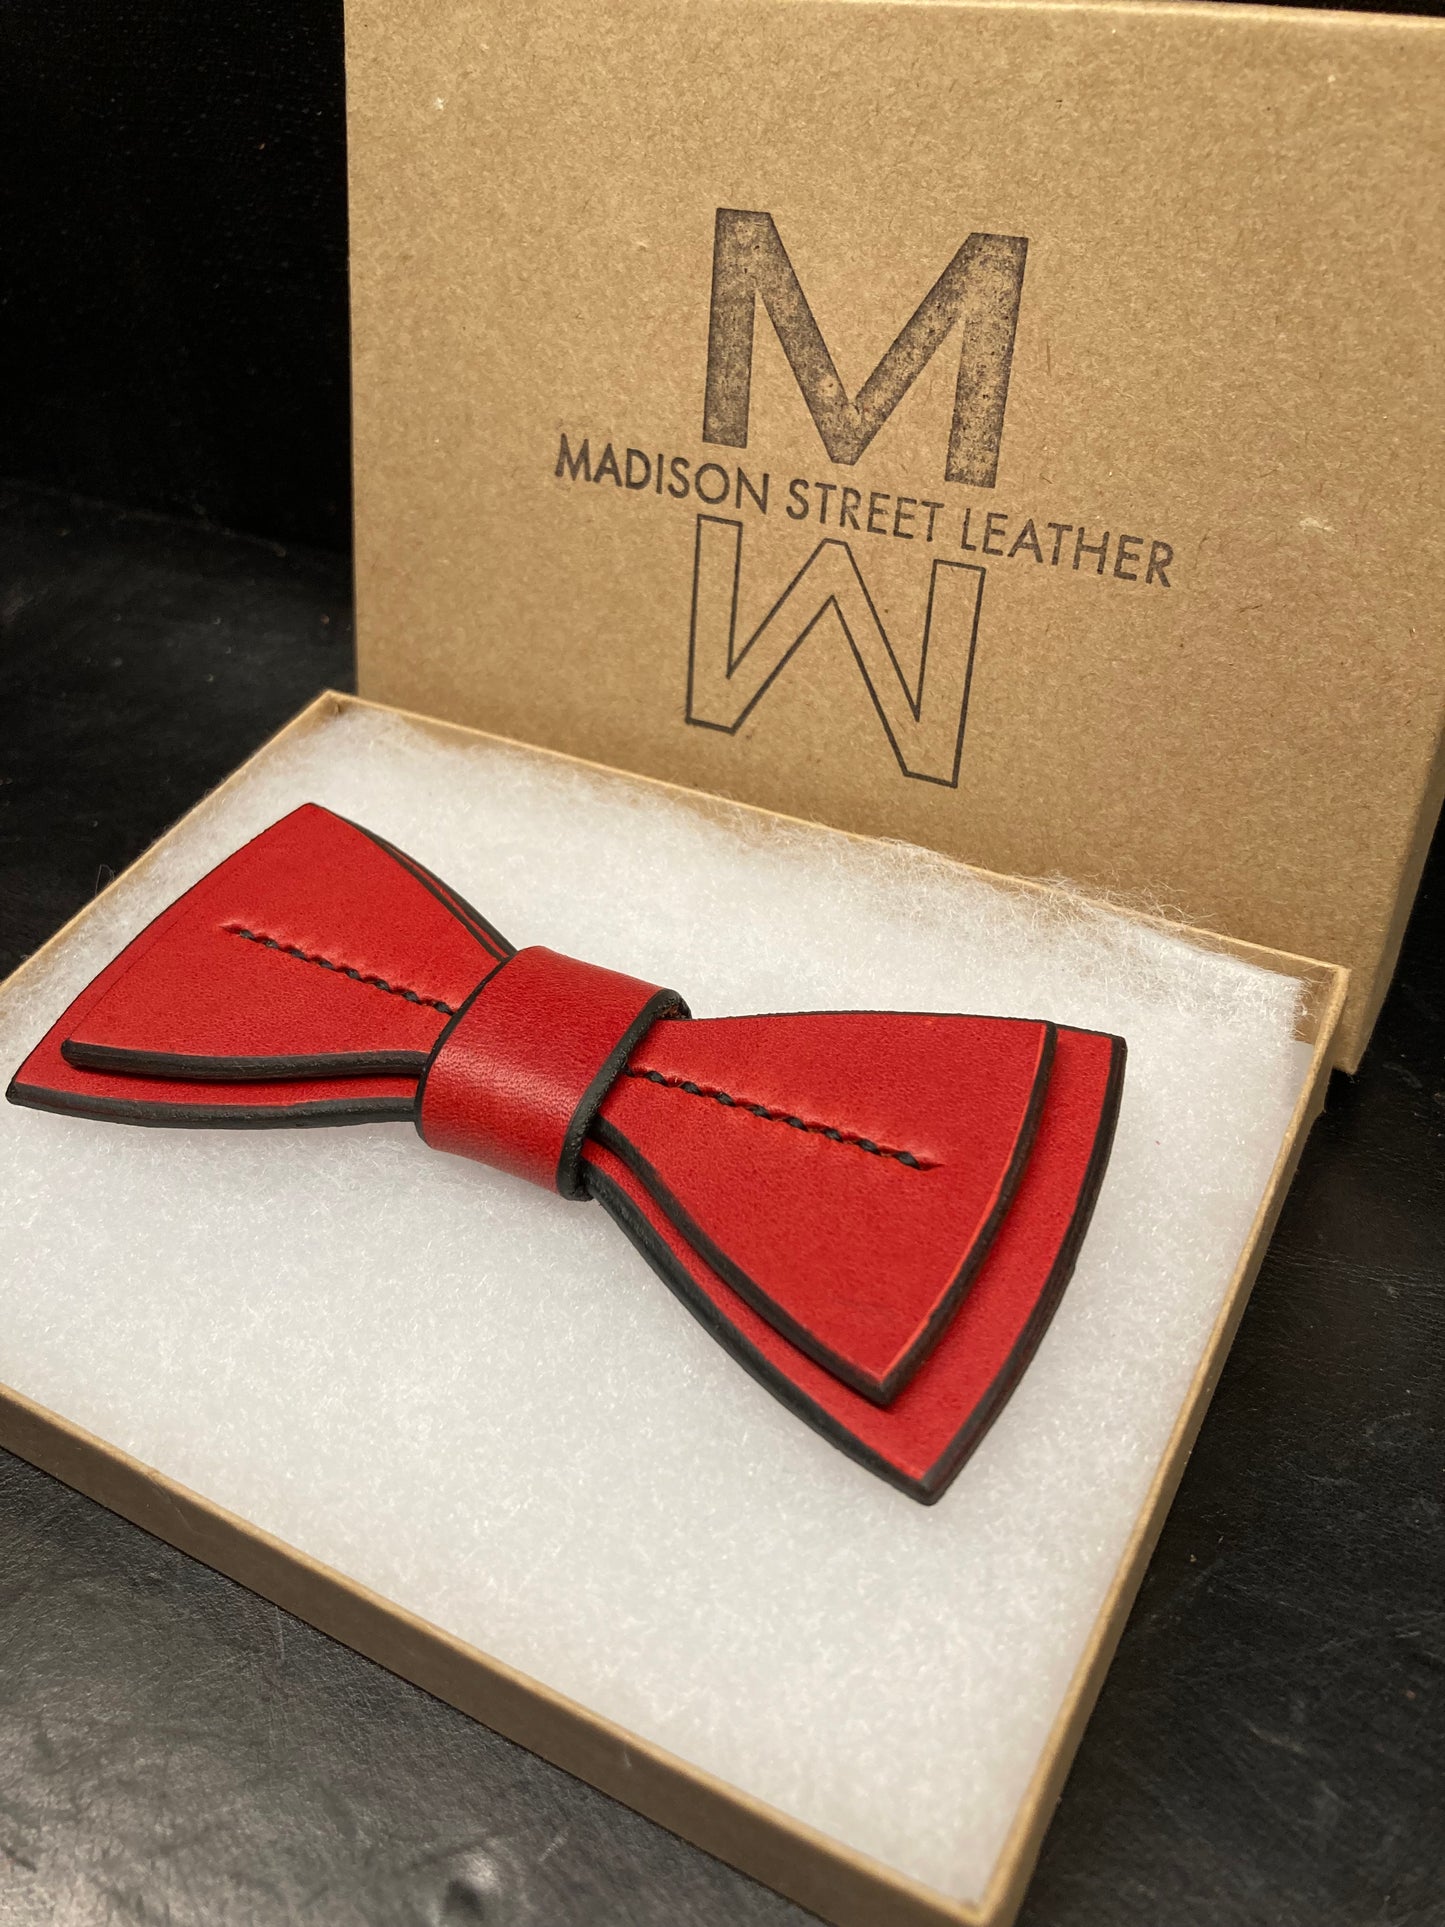 Red Bowtie with Black Edges